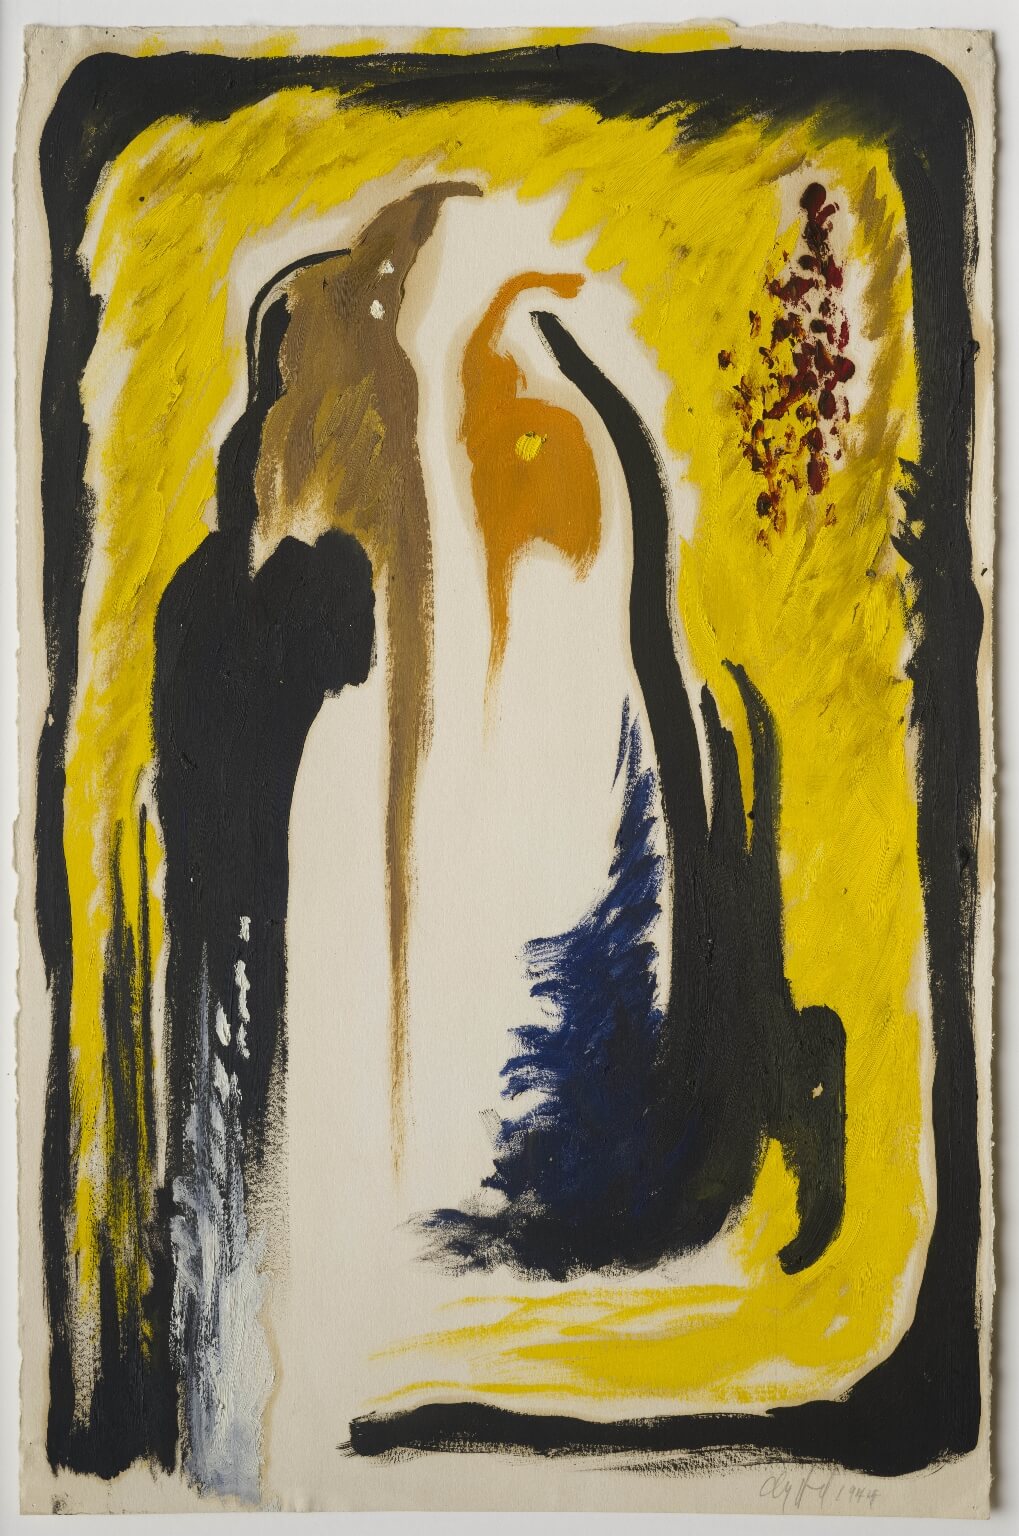 Abstract oil painting on paper with a black border, thick yellow inside border, two black figures separated by blank space, with highlights of tan and orange